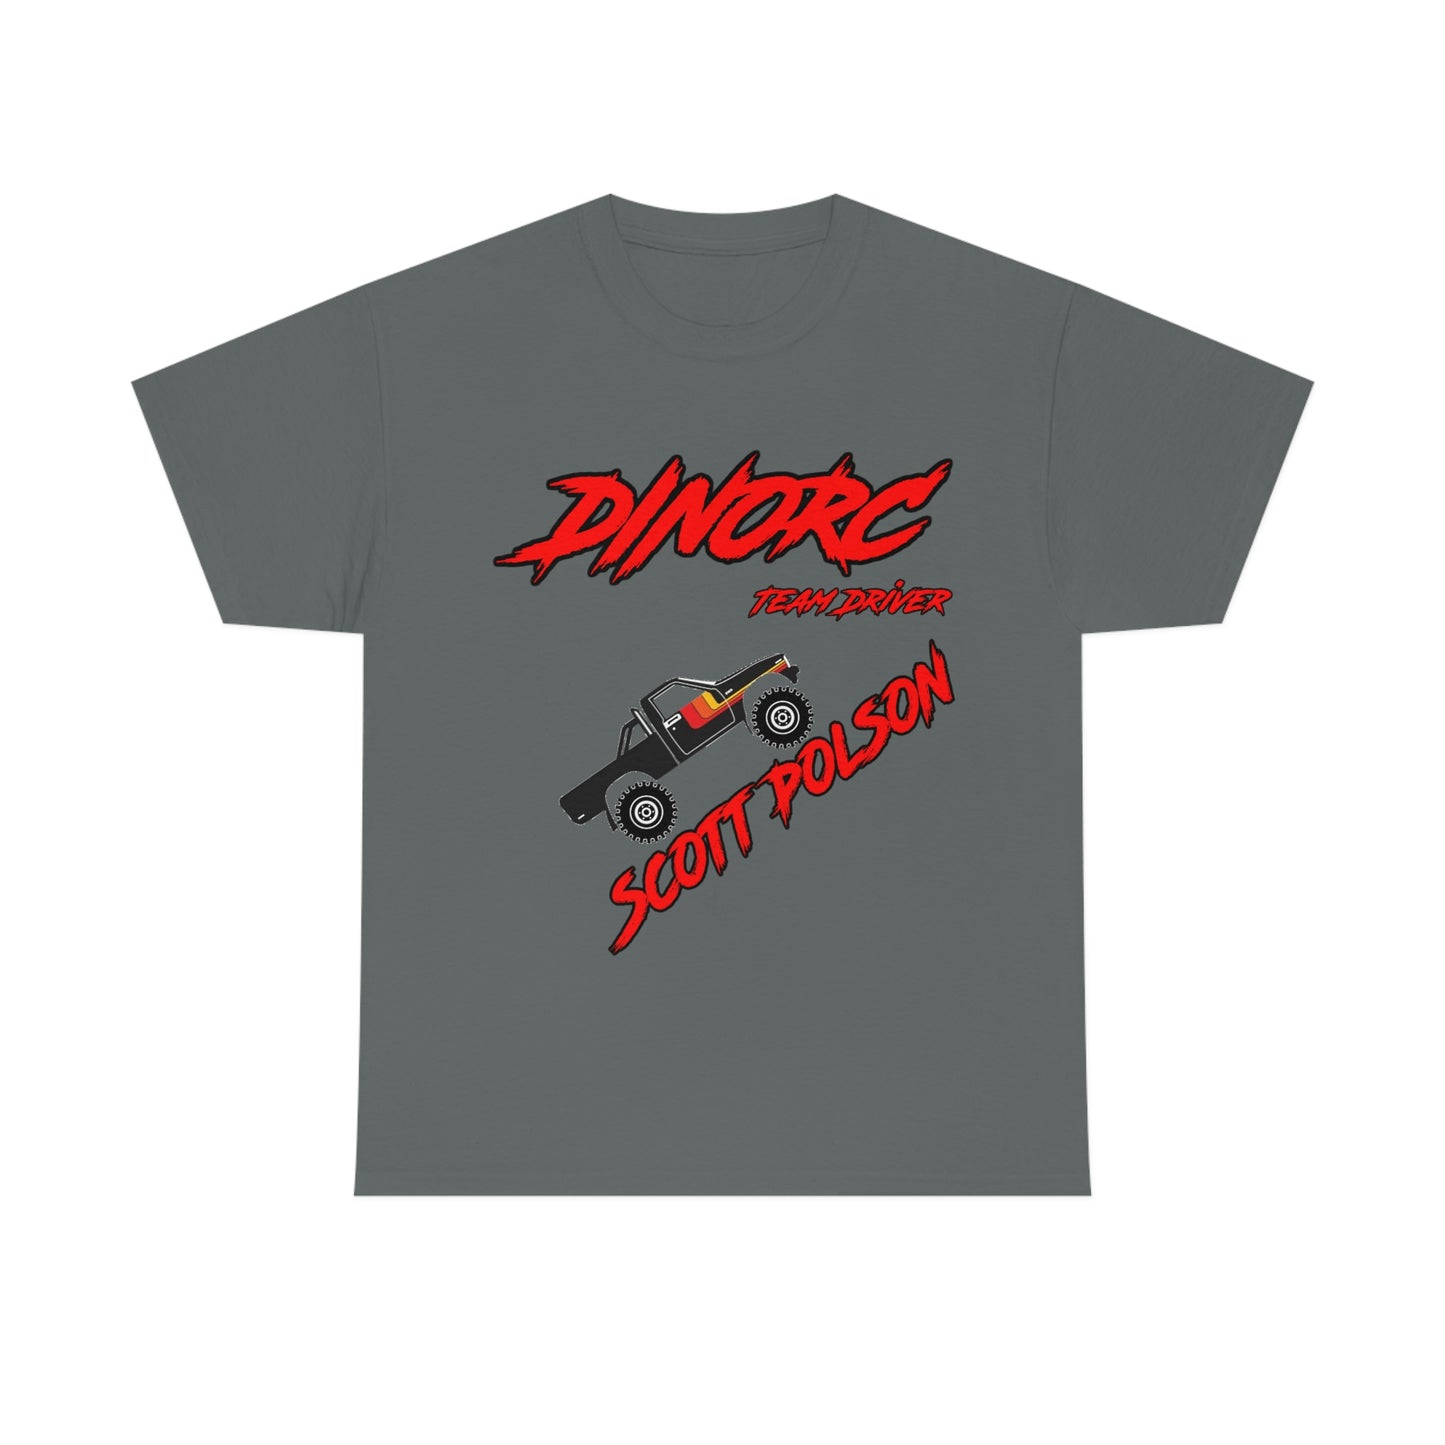 Team Driver Scott Polson truck logo Front and Back DinoRc Logo T-Shirt S-5x 5 colors